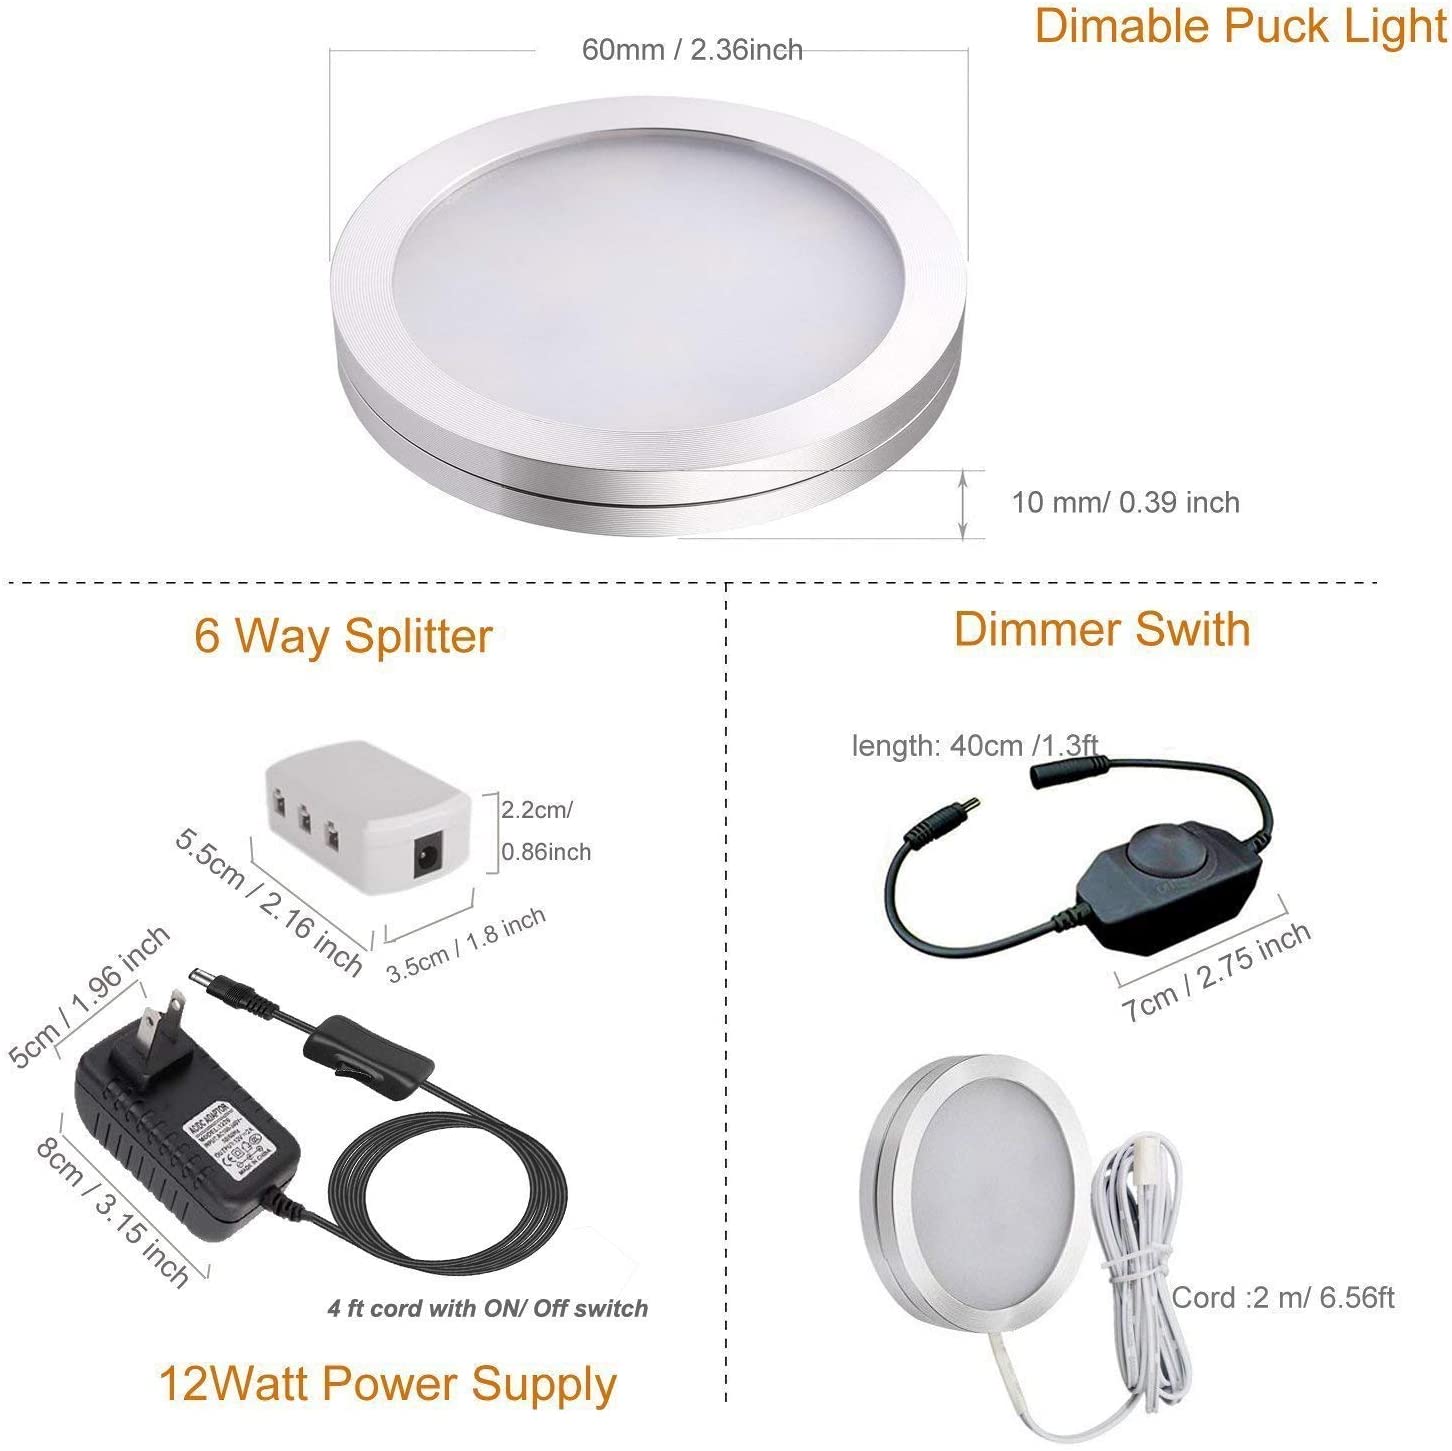 Cefrank Dimmable Under Cabinet Light Set of 4 Puck Lights